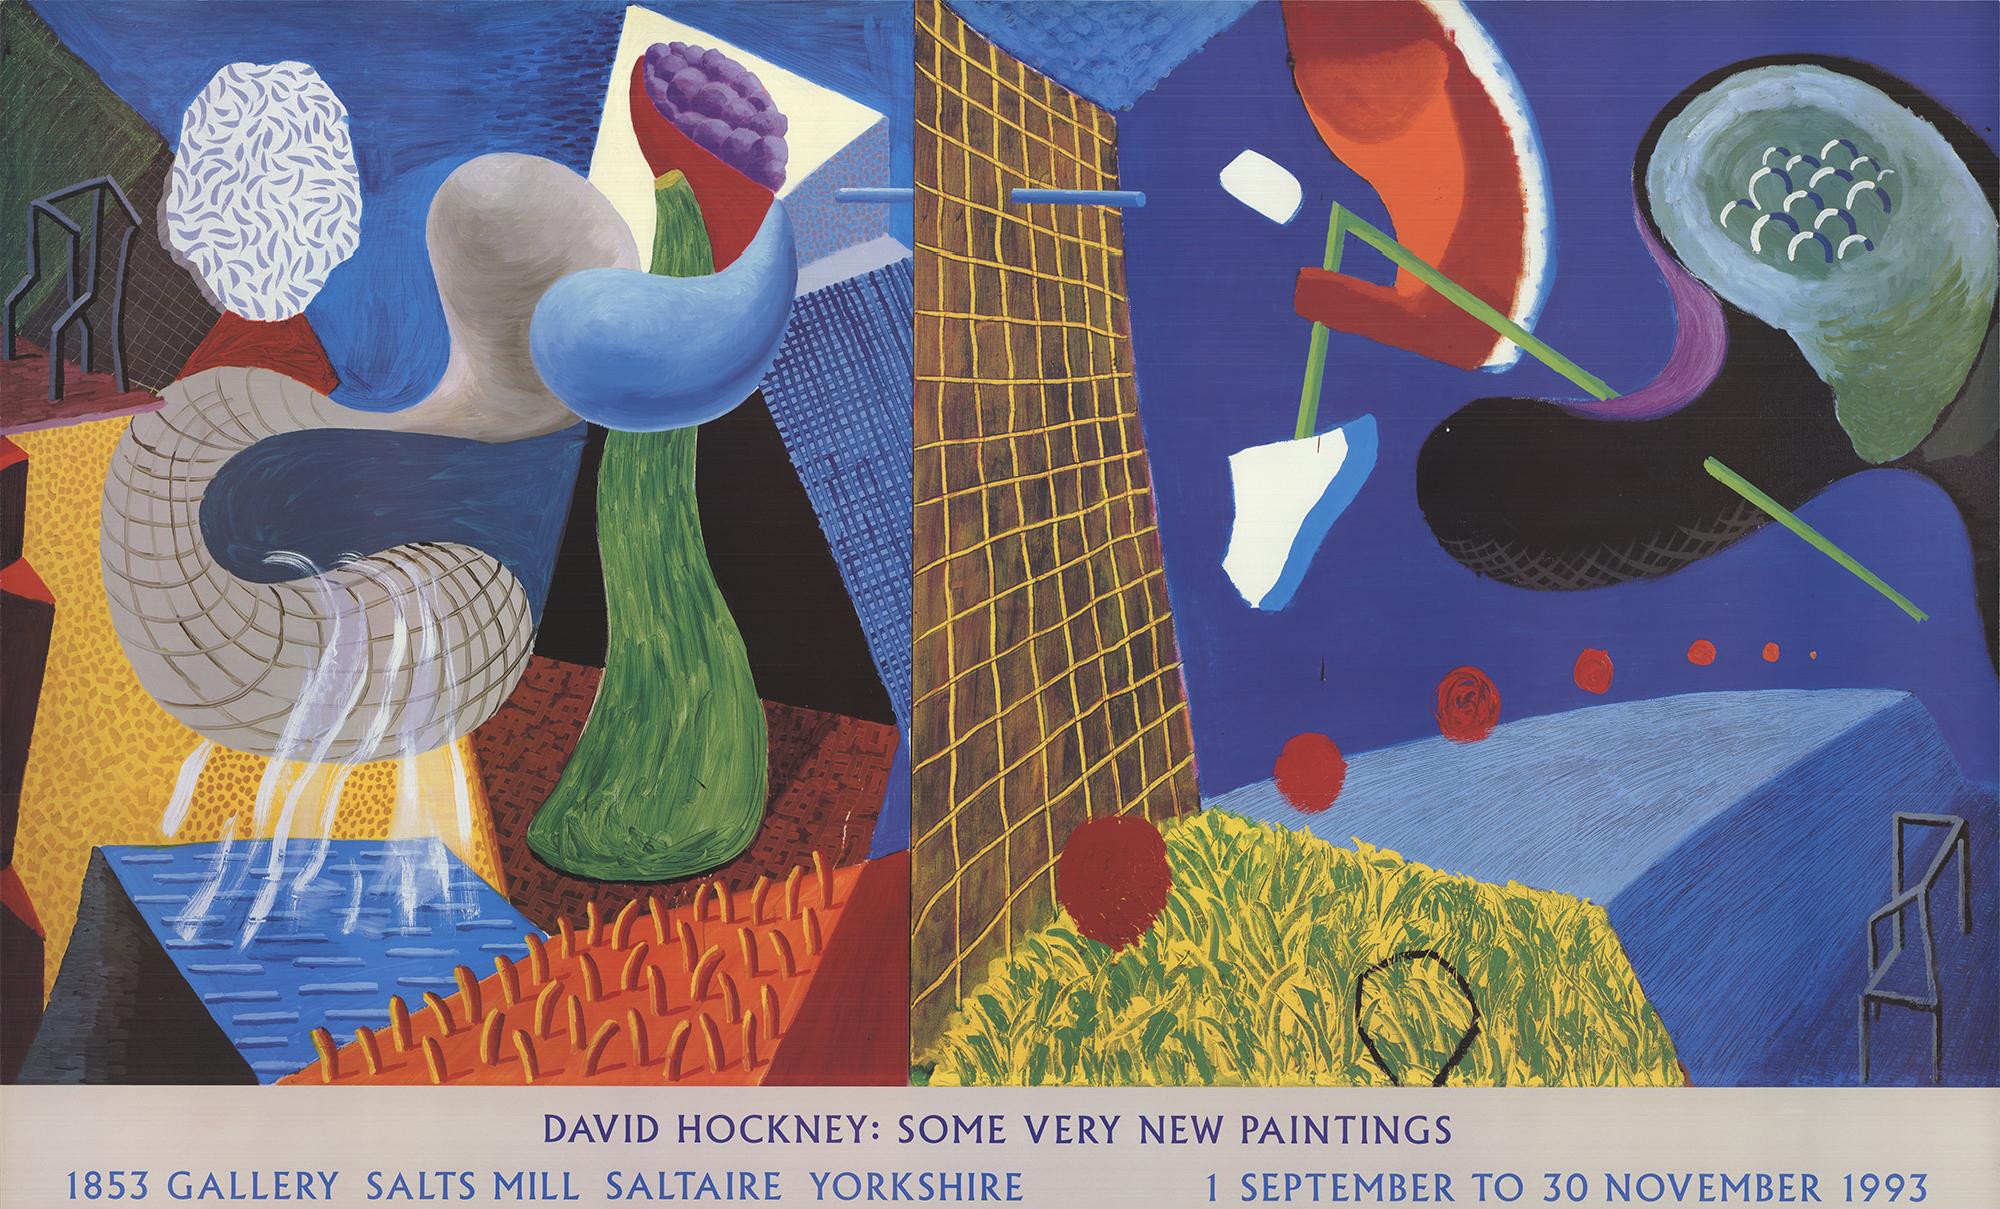 In 1993 Salts Mill exhibited David Hockney’s Very New Paintings, including this, The Other Side. This glorious and exuberant work was part of the 2017/18 Hockney retrospective, seen at Tate Britain, London, the Pompidou Centre, Paris and the